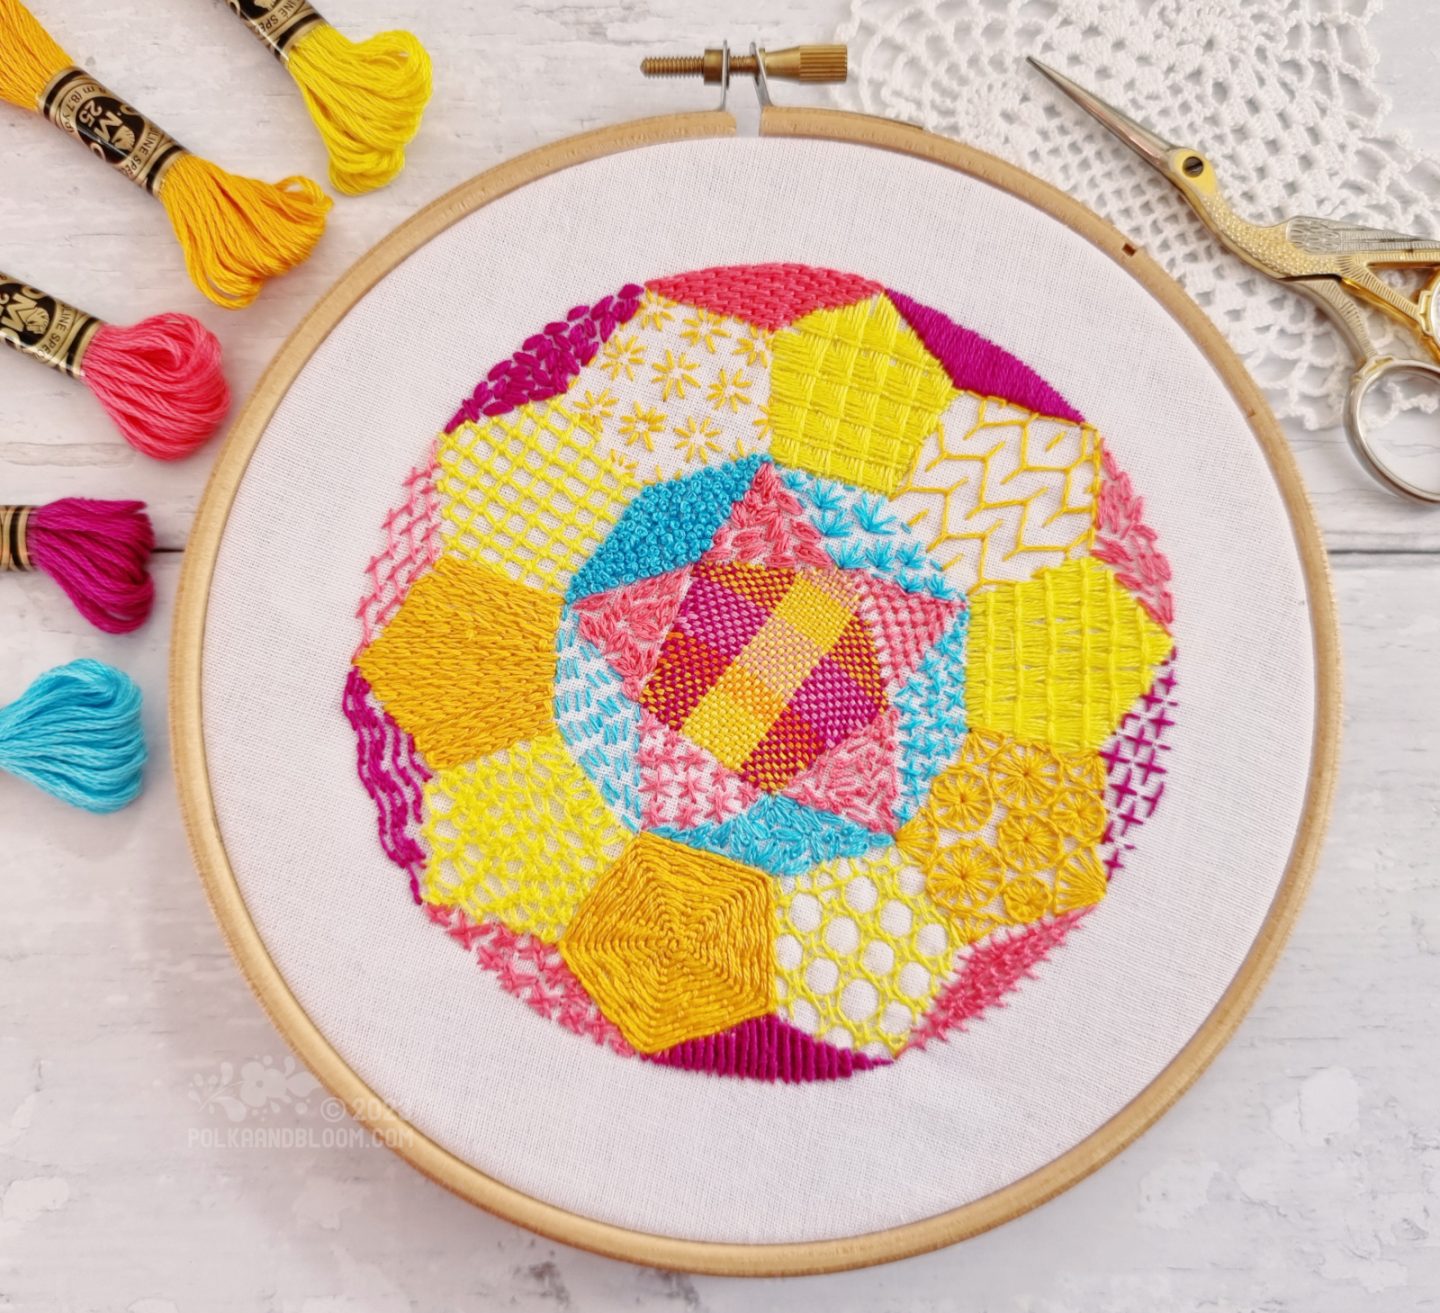 View from above of an embroidery hoop with white fabric. There is a round design embroidered on the fabric. The circle is divided into 31 segments, starting with a pentagon in the centre.